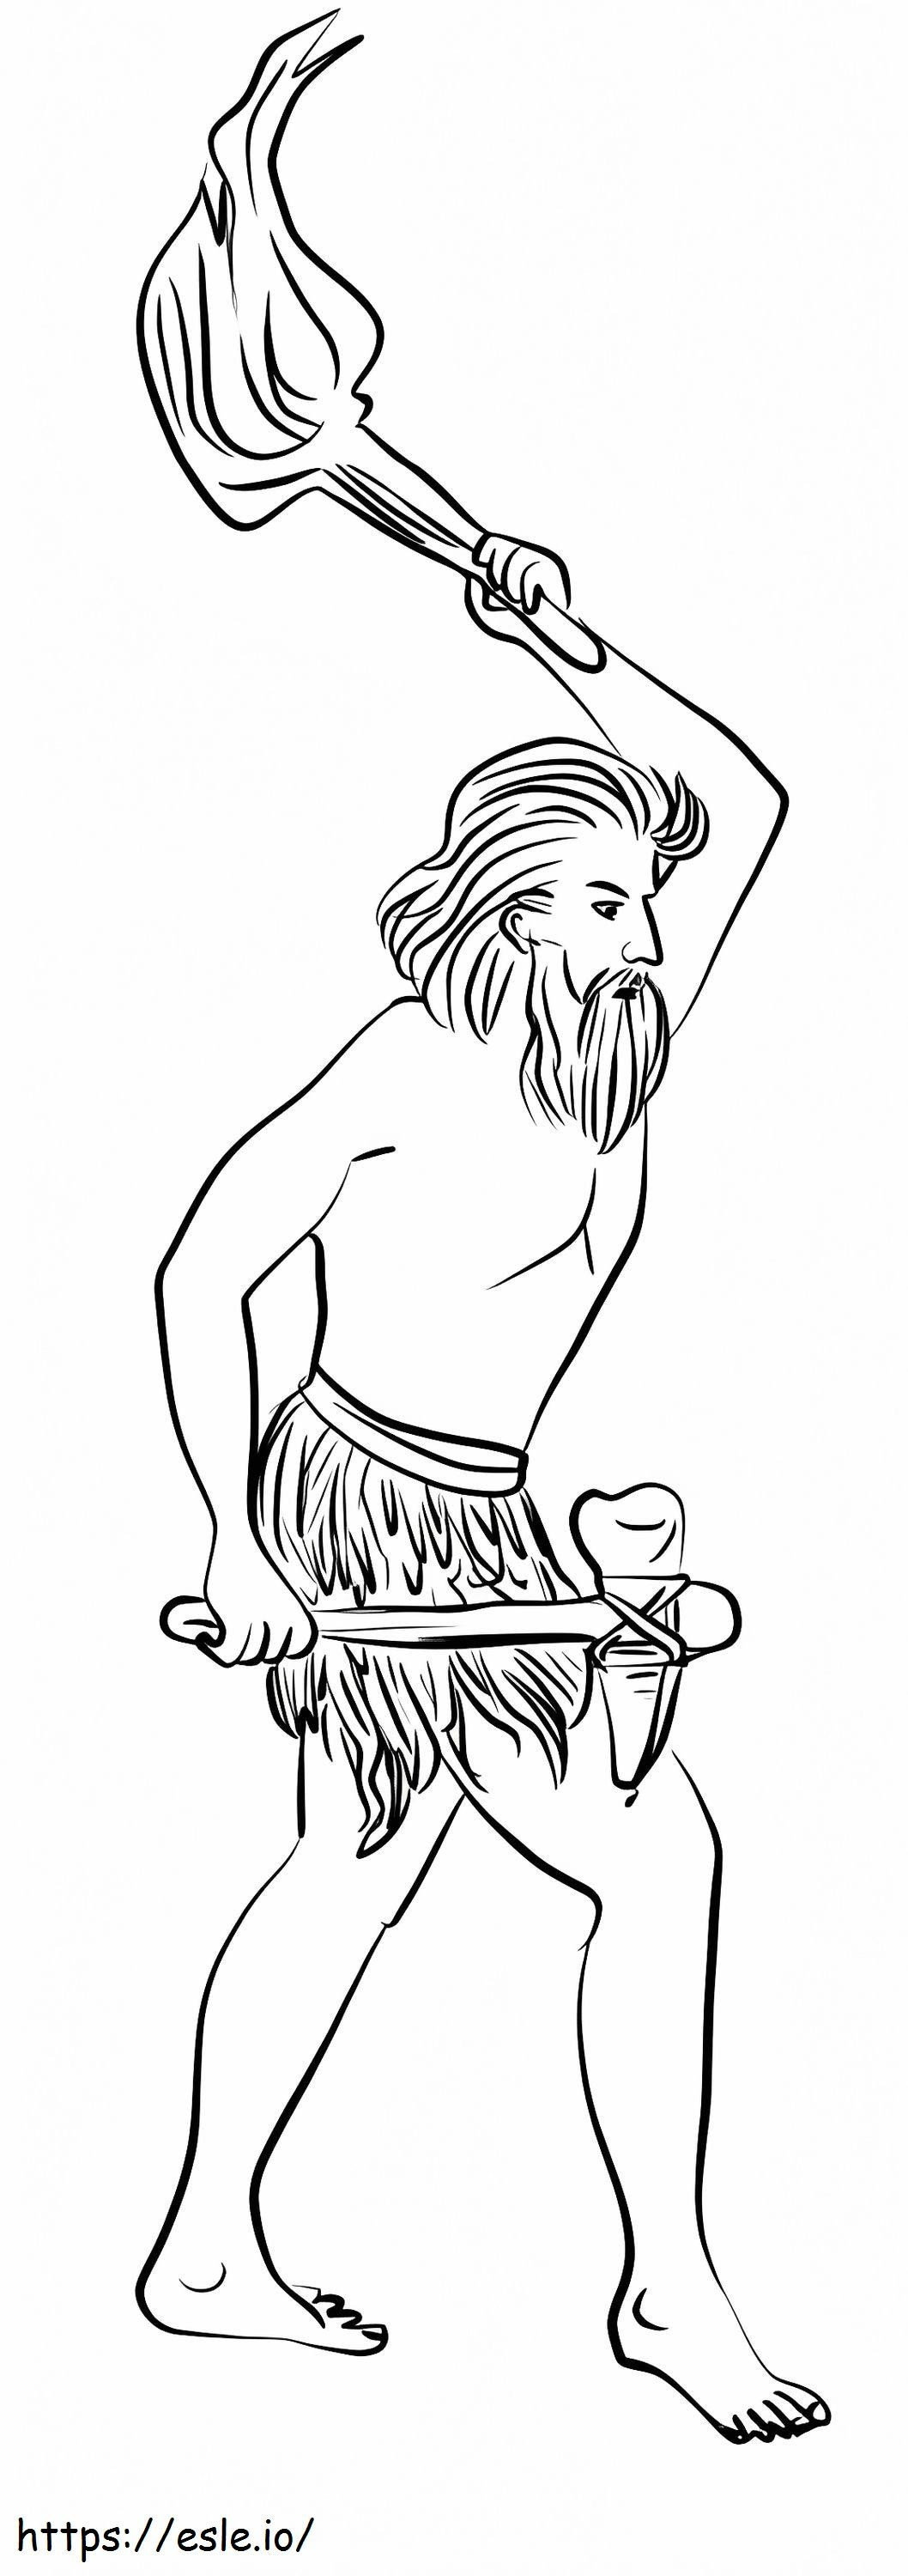 Stone Age Man coloring page